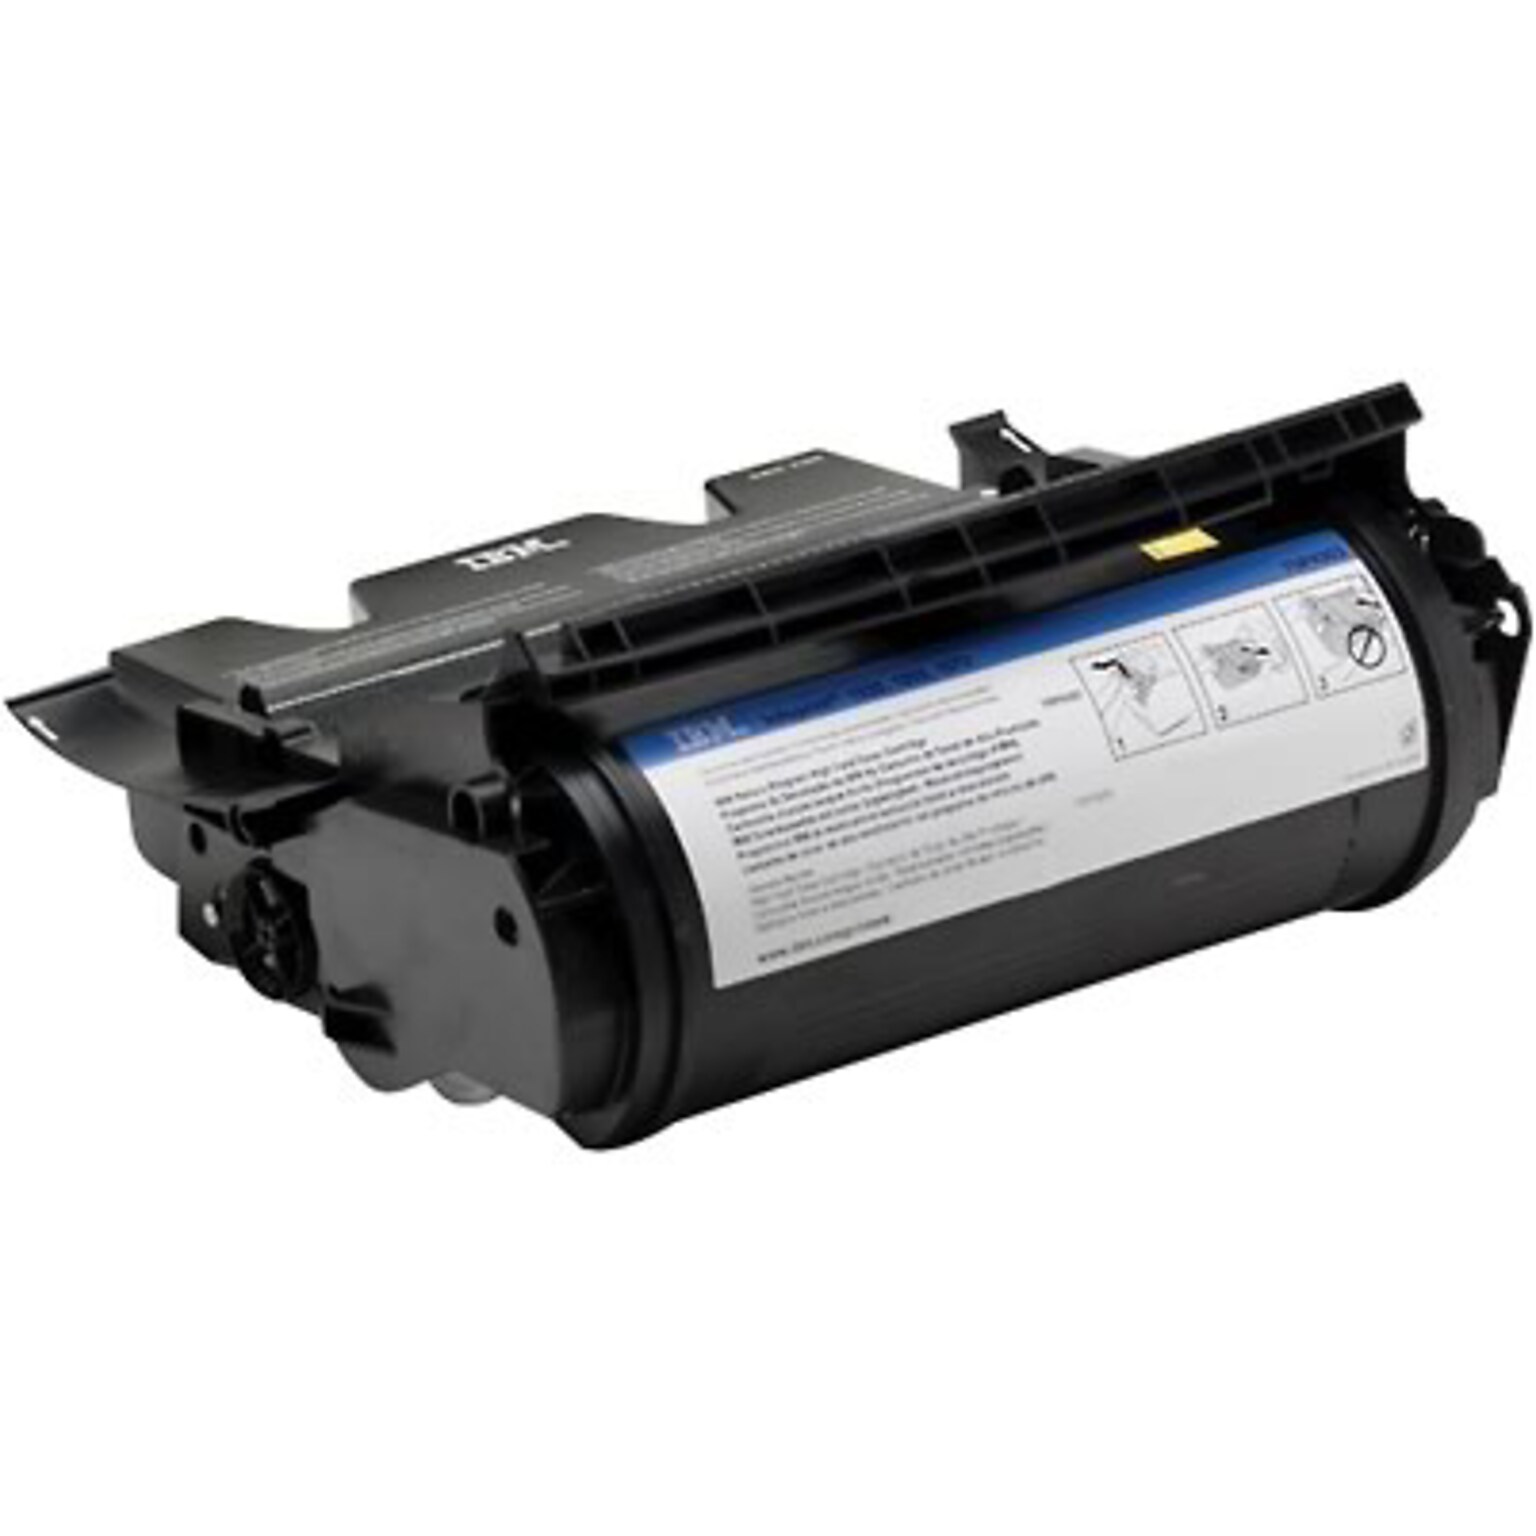 Quill® Remanufactured Compatible IBM® Laser Cartridge for InfoPrint 1332 (100% Satisfaction Guaranteed)